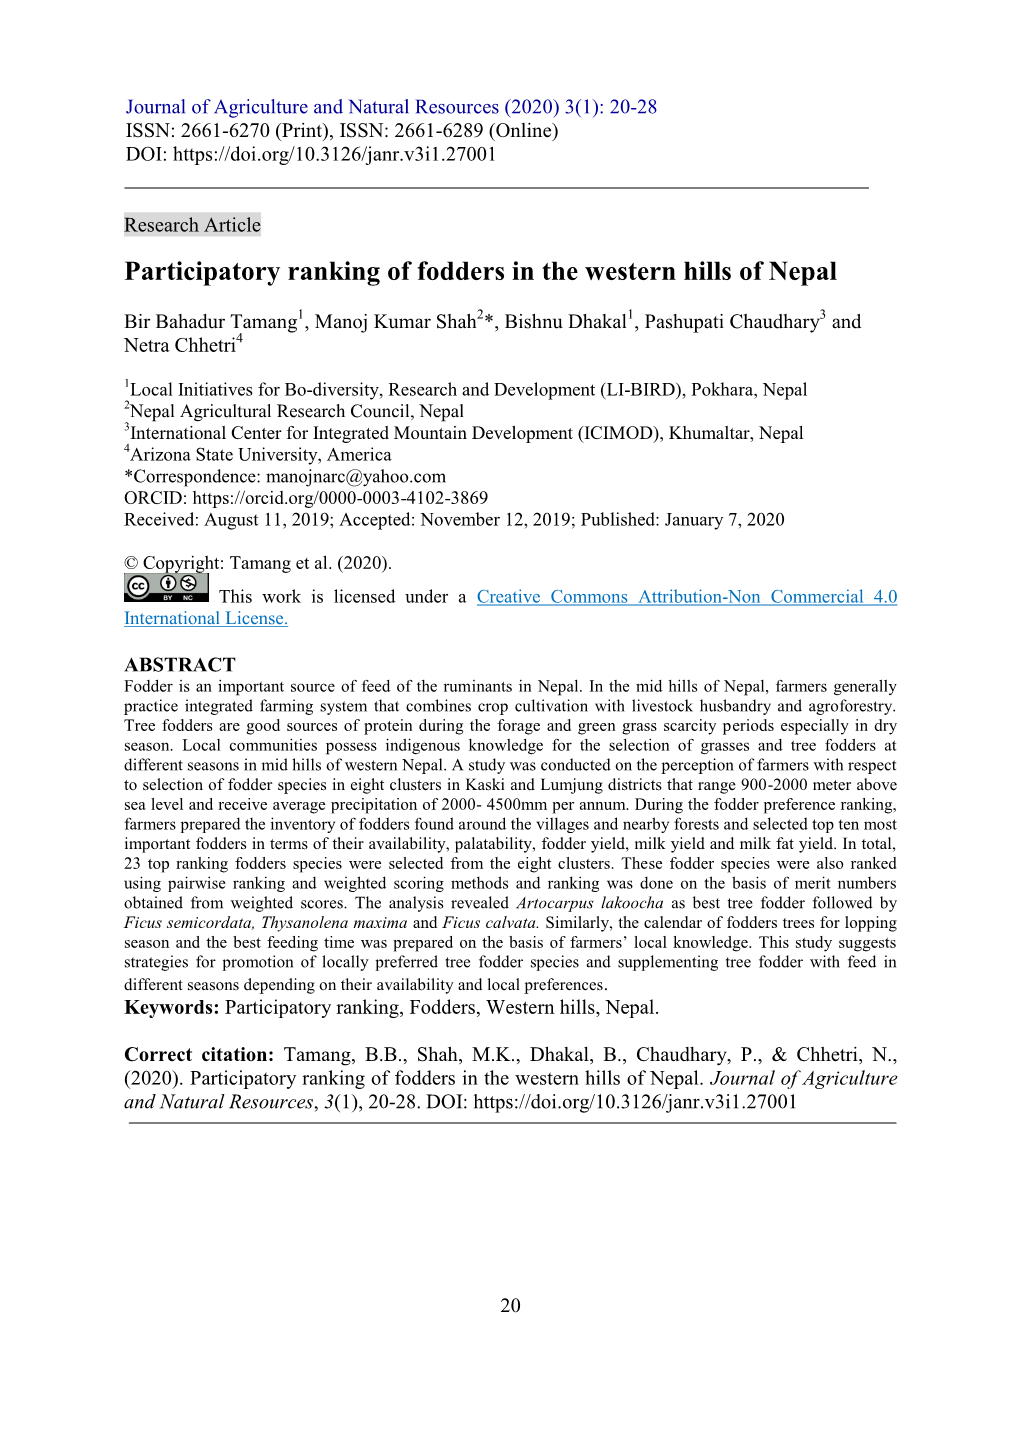 Participatory Ranking of Fodders in the Western Hills of Nepal